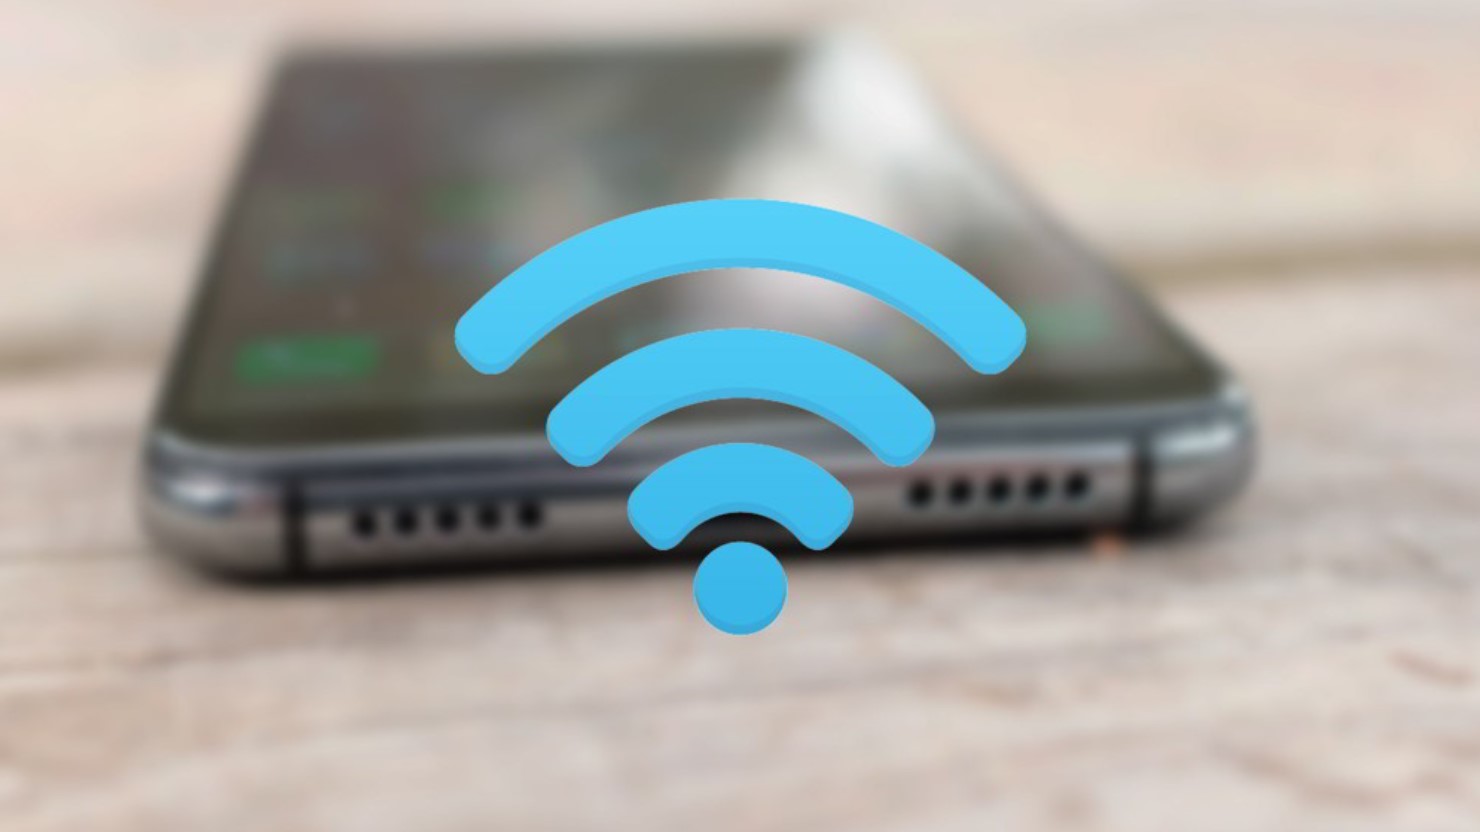 My Mobile Does Not Connect To The Wifi At Home: 5 Possible Solutions